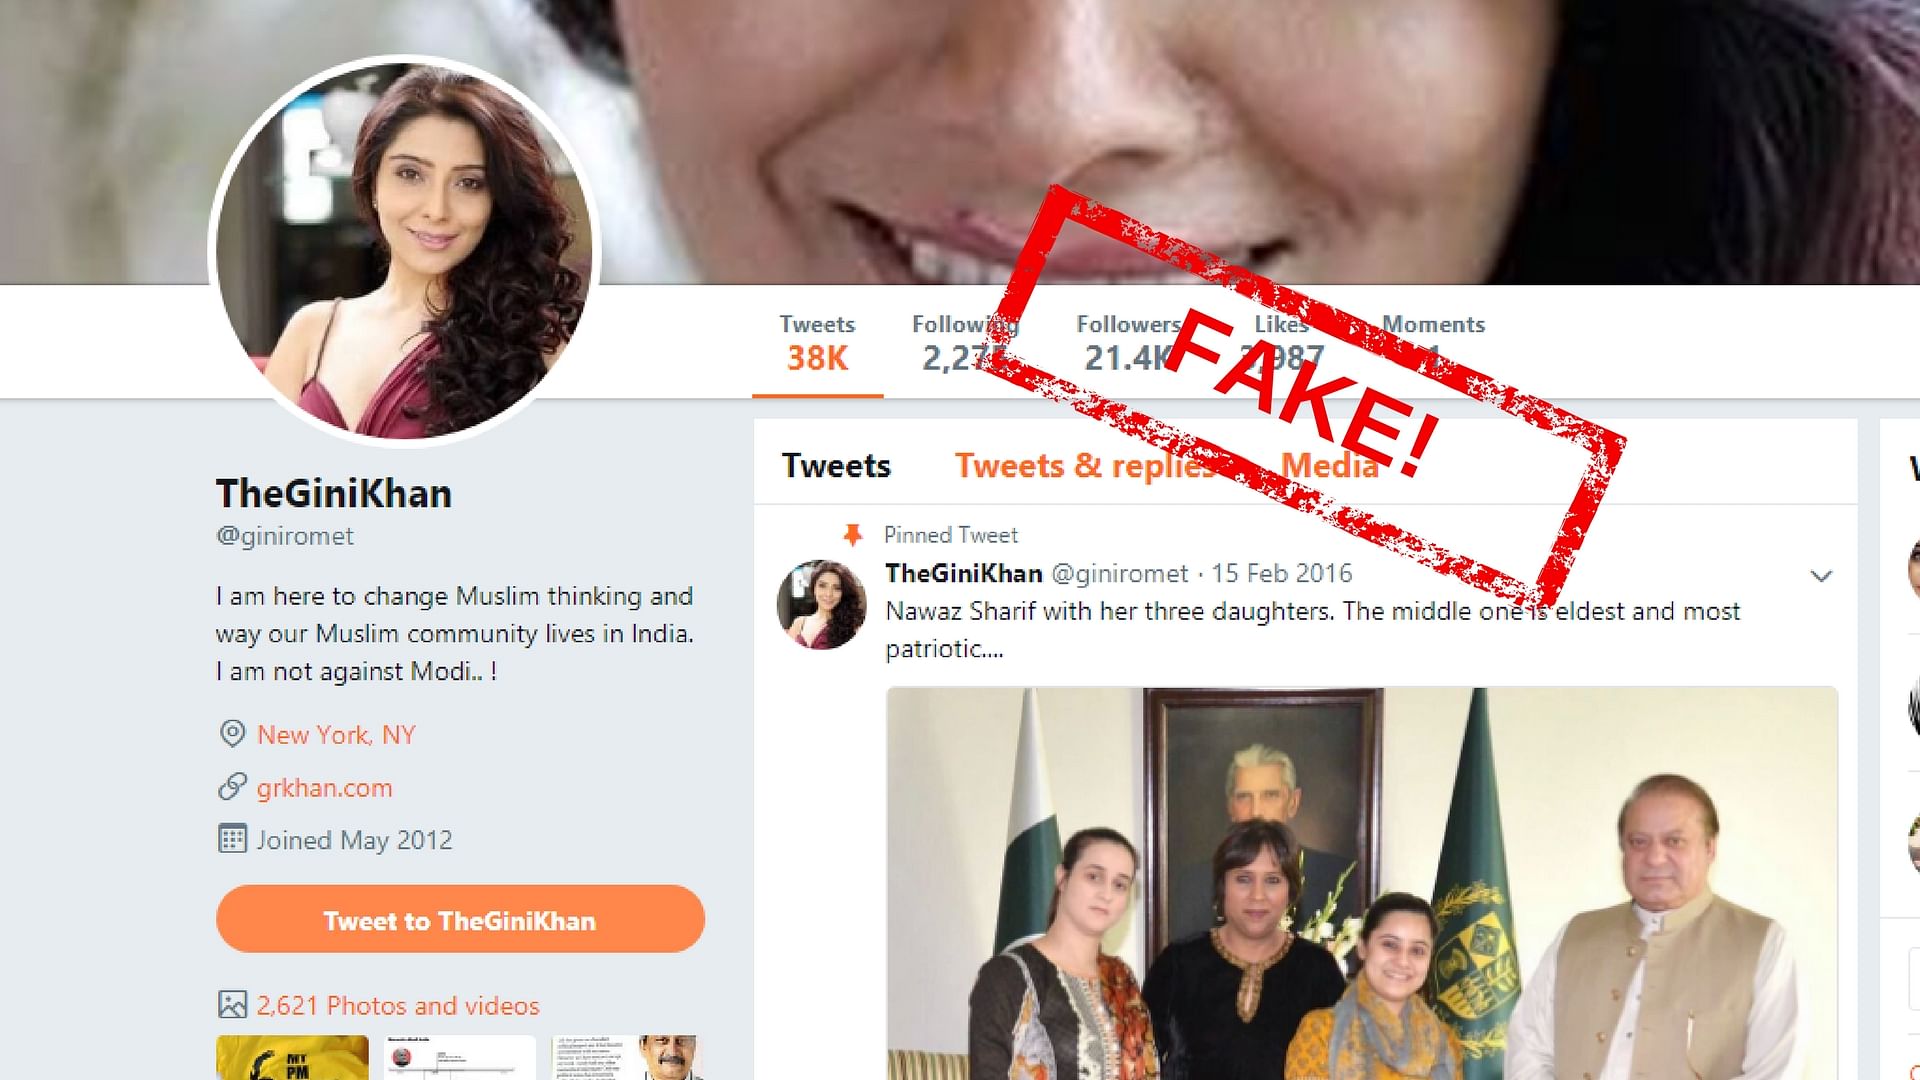 Meet Gini Khan, or <a href="https://twitter.com/giniromet">@giniromet</a>, a fake social media profile with a muslim identity that tweets about how PM Modi is “the most loved PM India has ever had,” and conducts polls against muslims.